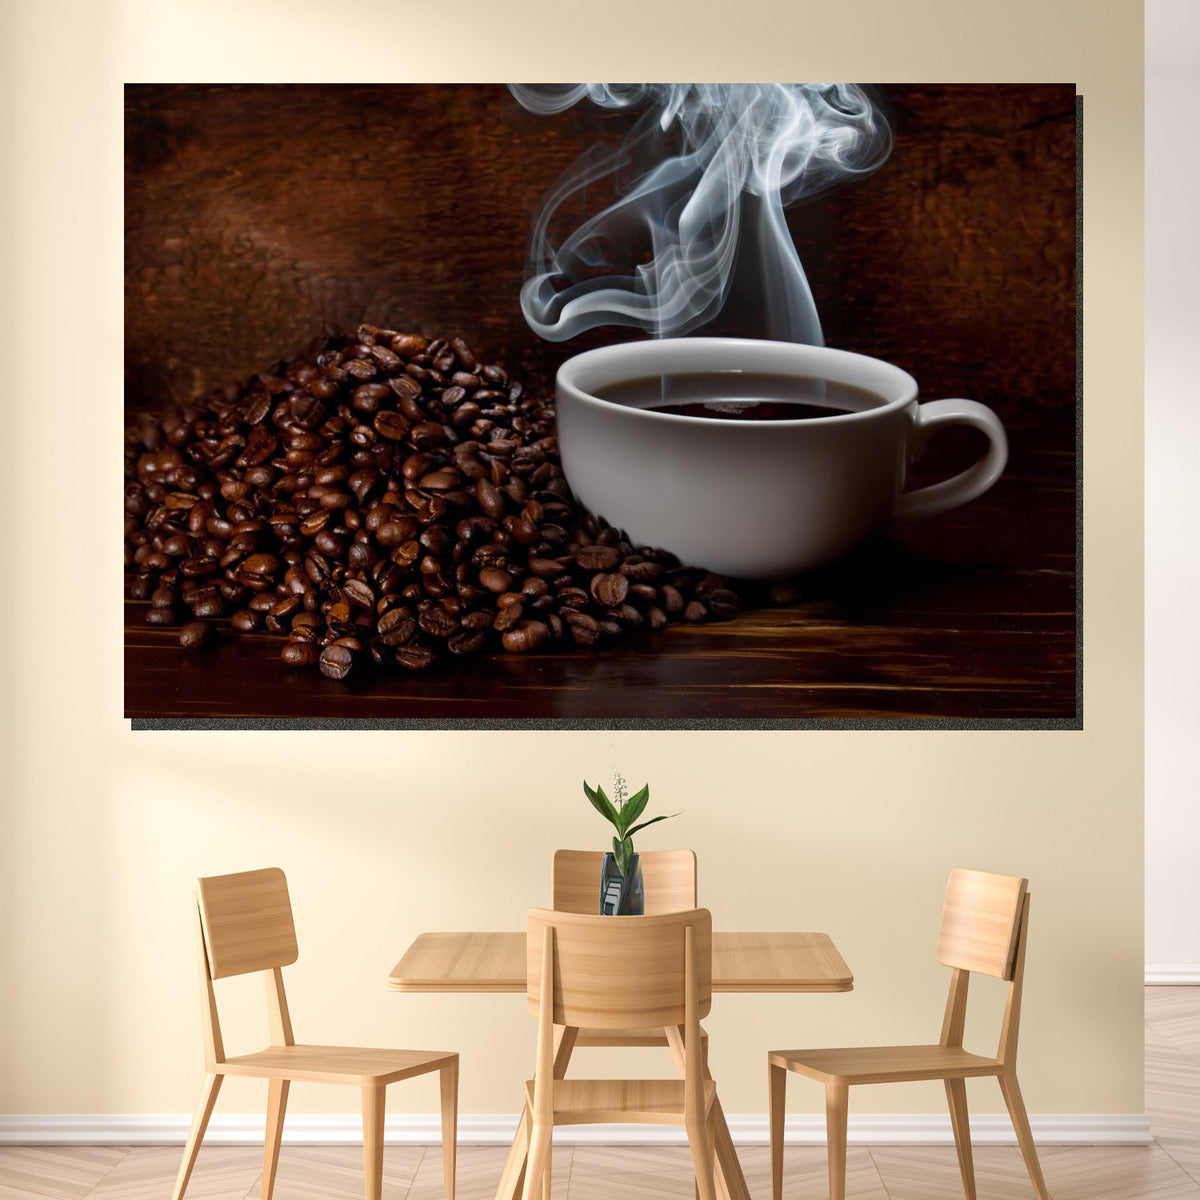 https://cdn.shopify.com/s/files/1/0387/9986/8044/products/AromaofCoffeeCanvasArtprintStretched-1.jpg